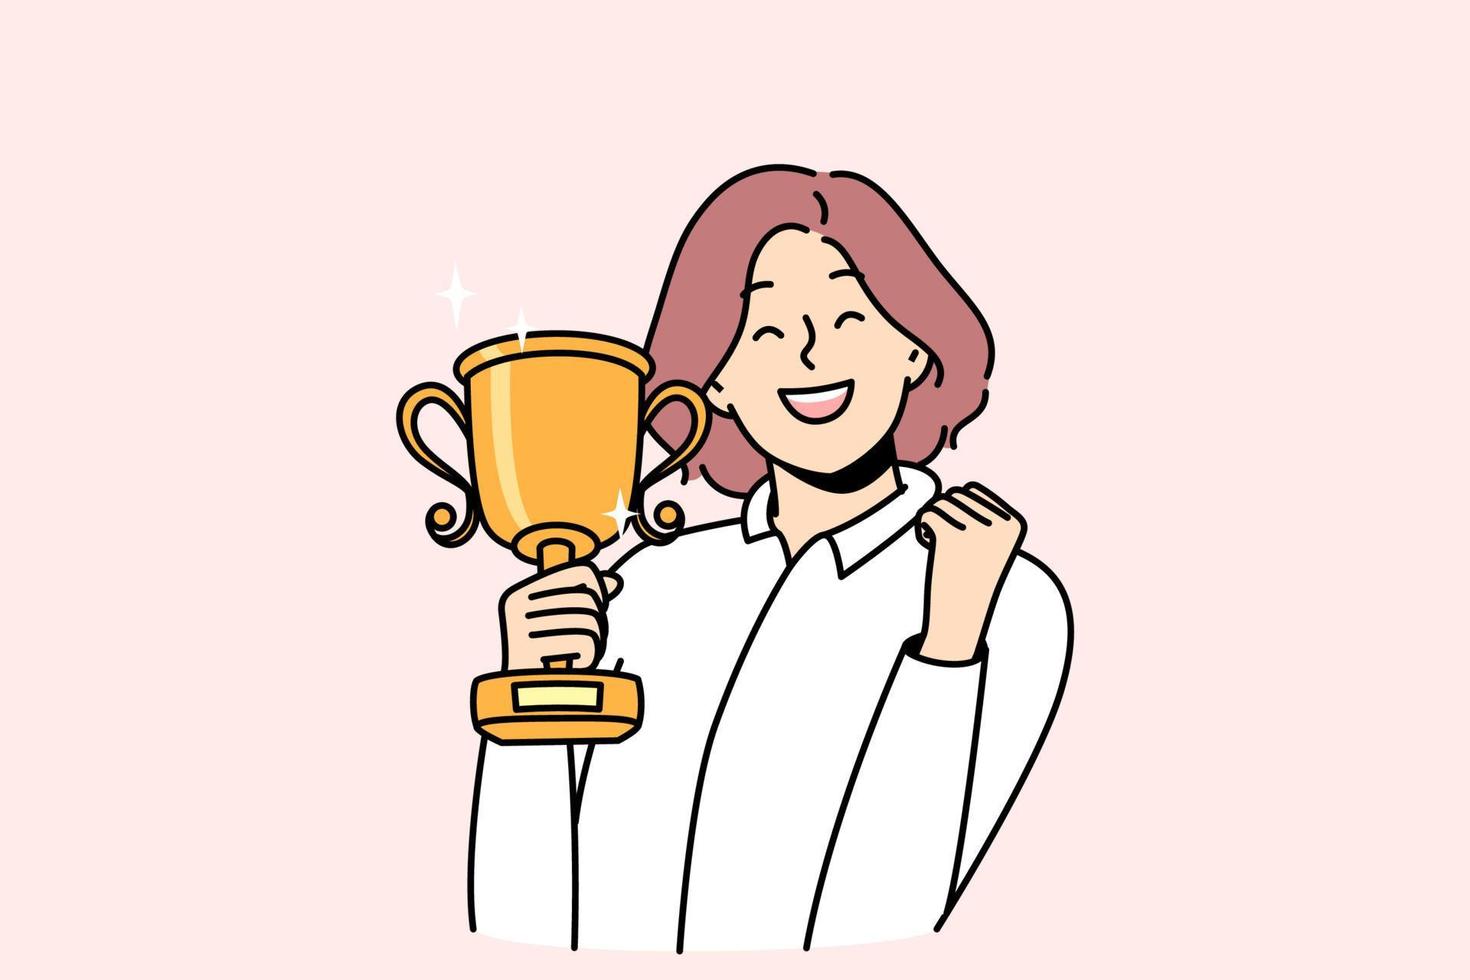 Overjoyed young woman with gold trophy in hands celebrate win or victory. Smiling businesswoman with golden prize excited with personal achievement or success. Vector illustration.